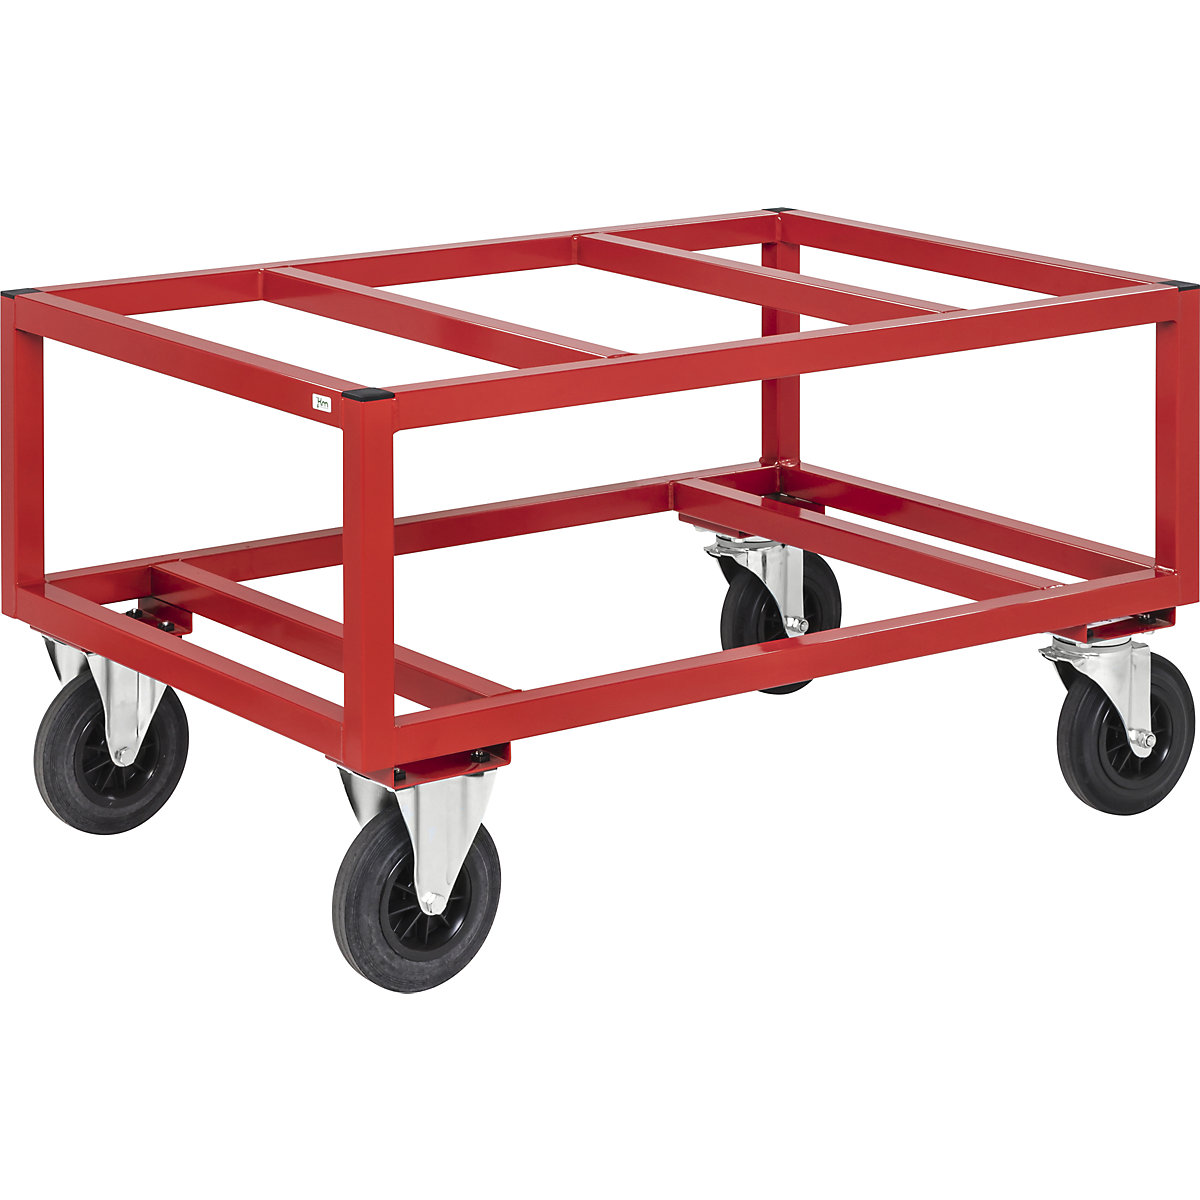 KM221 pallet dolly – Kongamek, LxWxH 1200 x 800 x 650 mm, red, 2 swivel castors with stops, 2 fixed castors, 5+ items-25